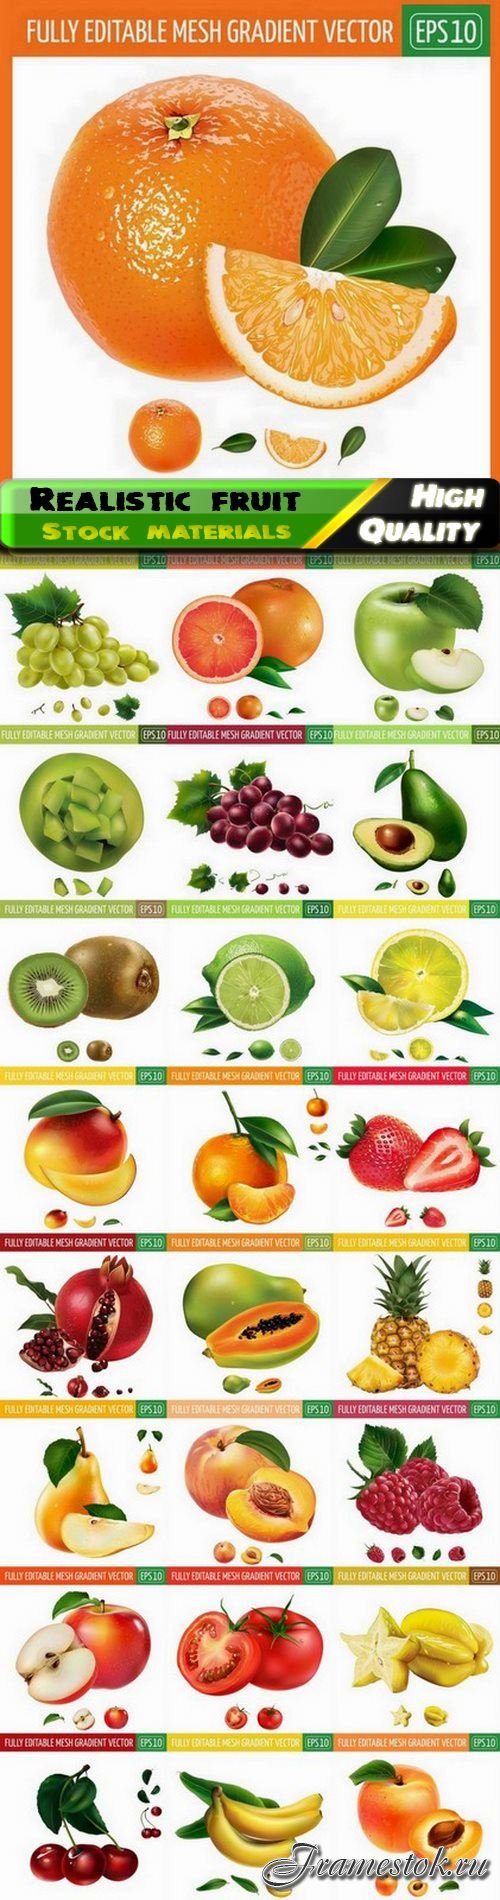 Illustration of realistic fruit and vegetable 2 - 25 Eps